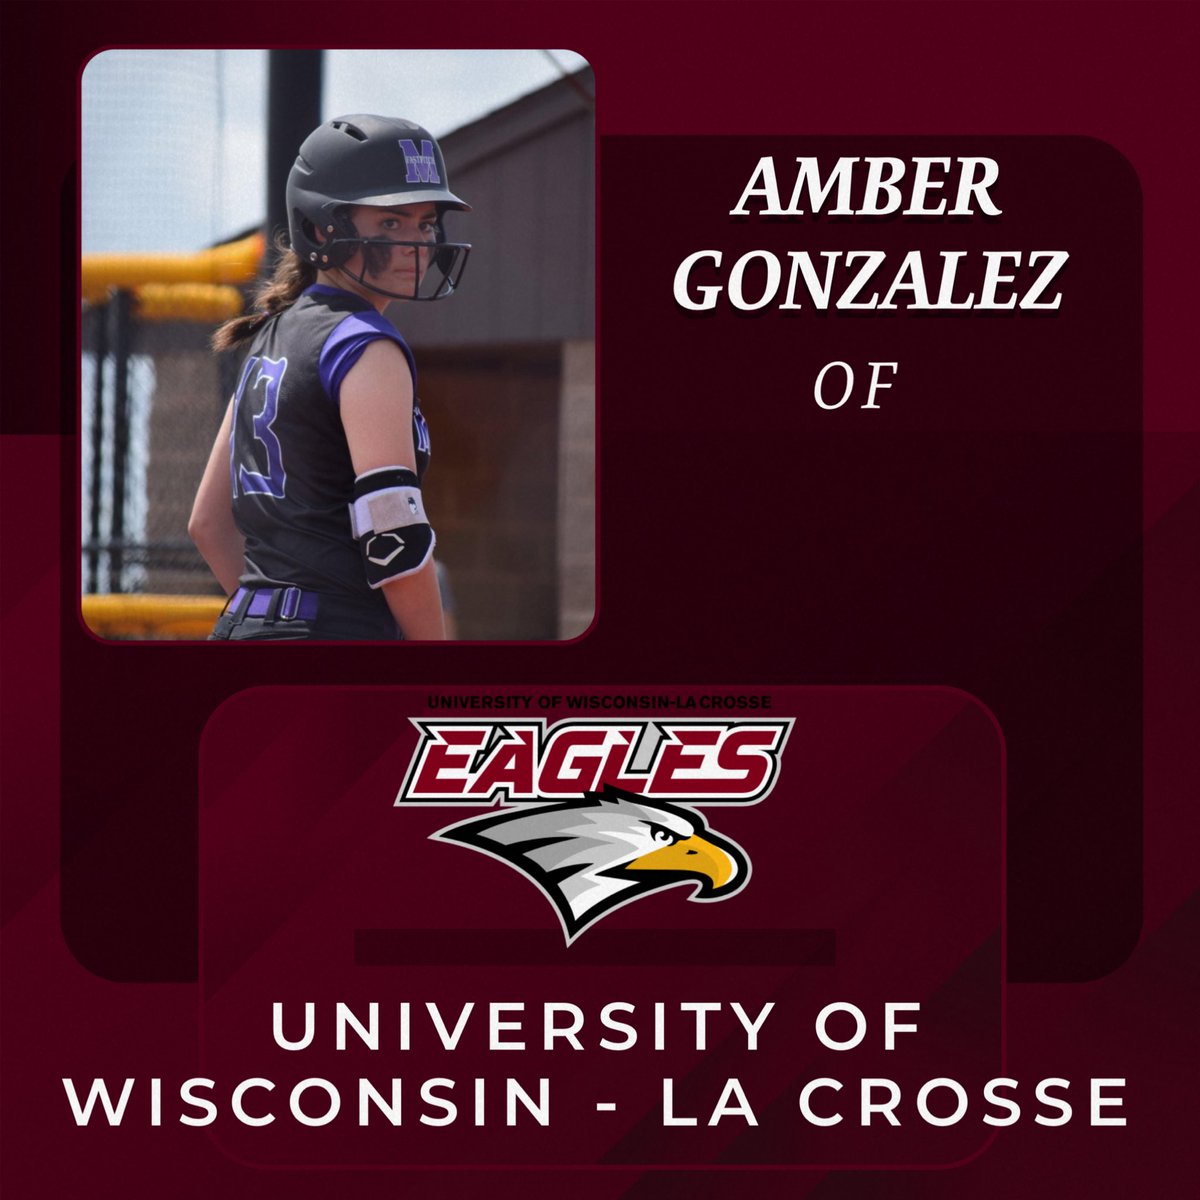 I am excited and honored to announce my commitment to further my academic and athletic career at the University of Wisconsin La Crosse. I am so grateful for this opportunity and can’t wait to see what the next four years have to offer! Thank you! #committed #nextfour #rolleags